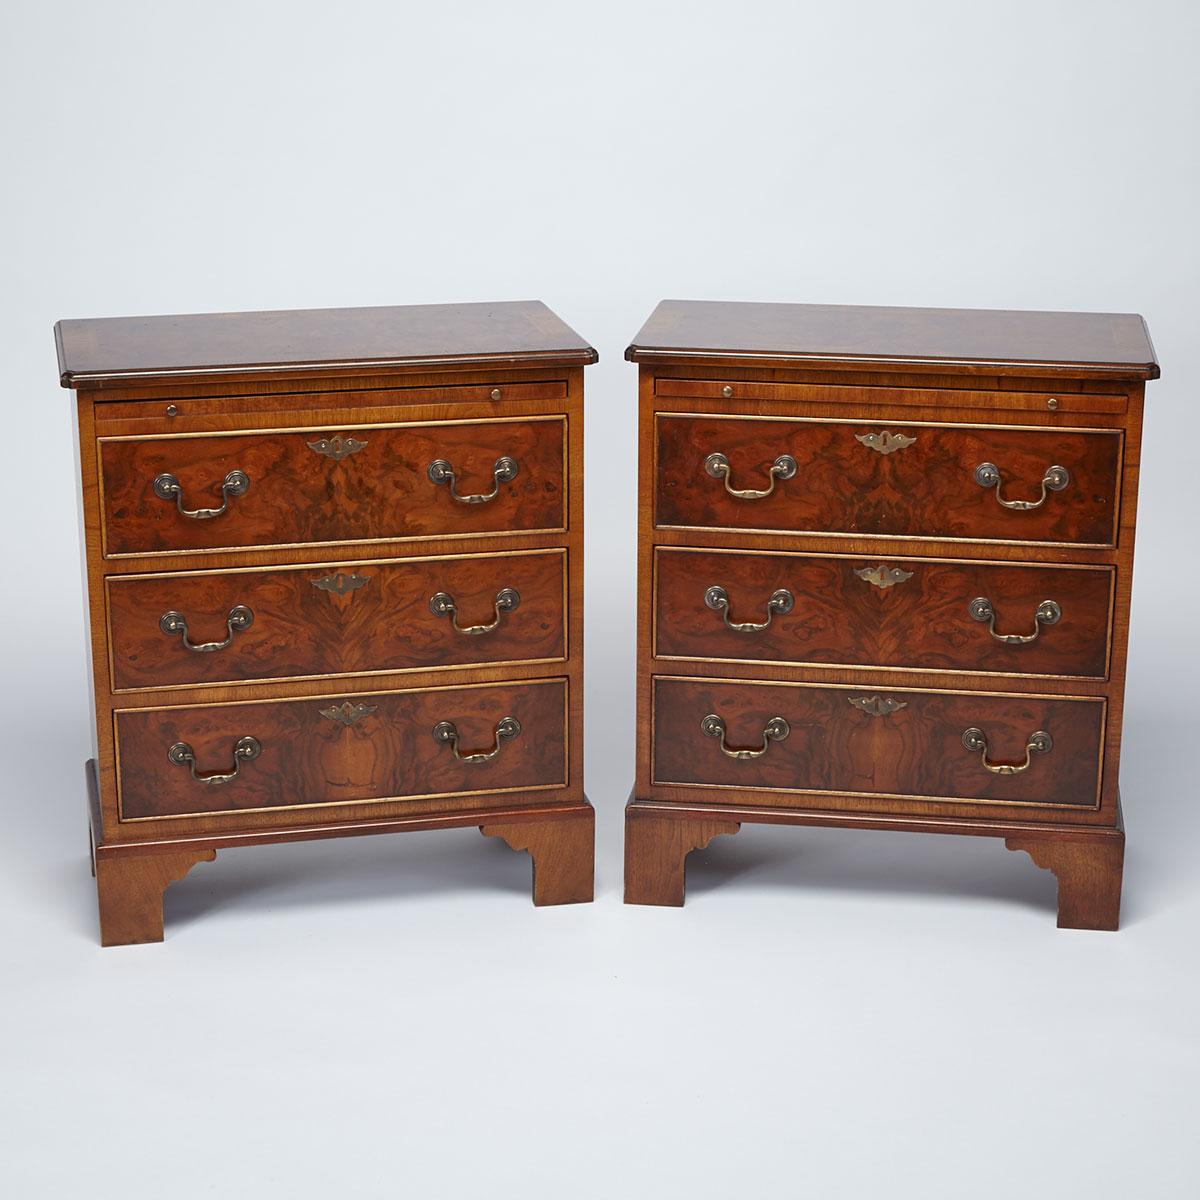 Pair of Georgian Style Crossbanded Mahogany Bachelor’s Chests, 20th century